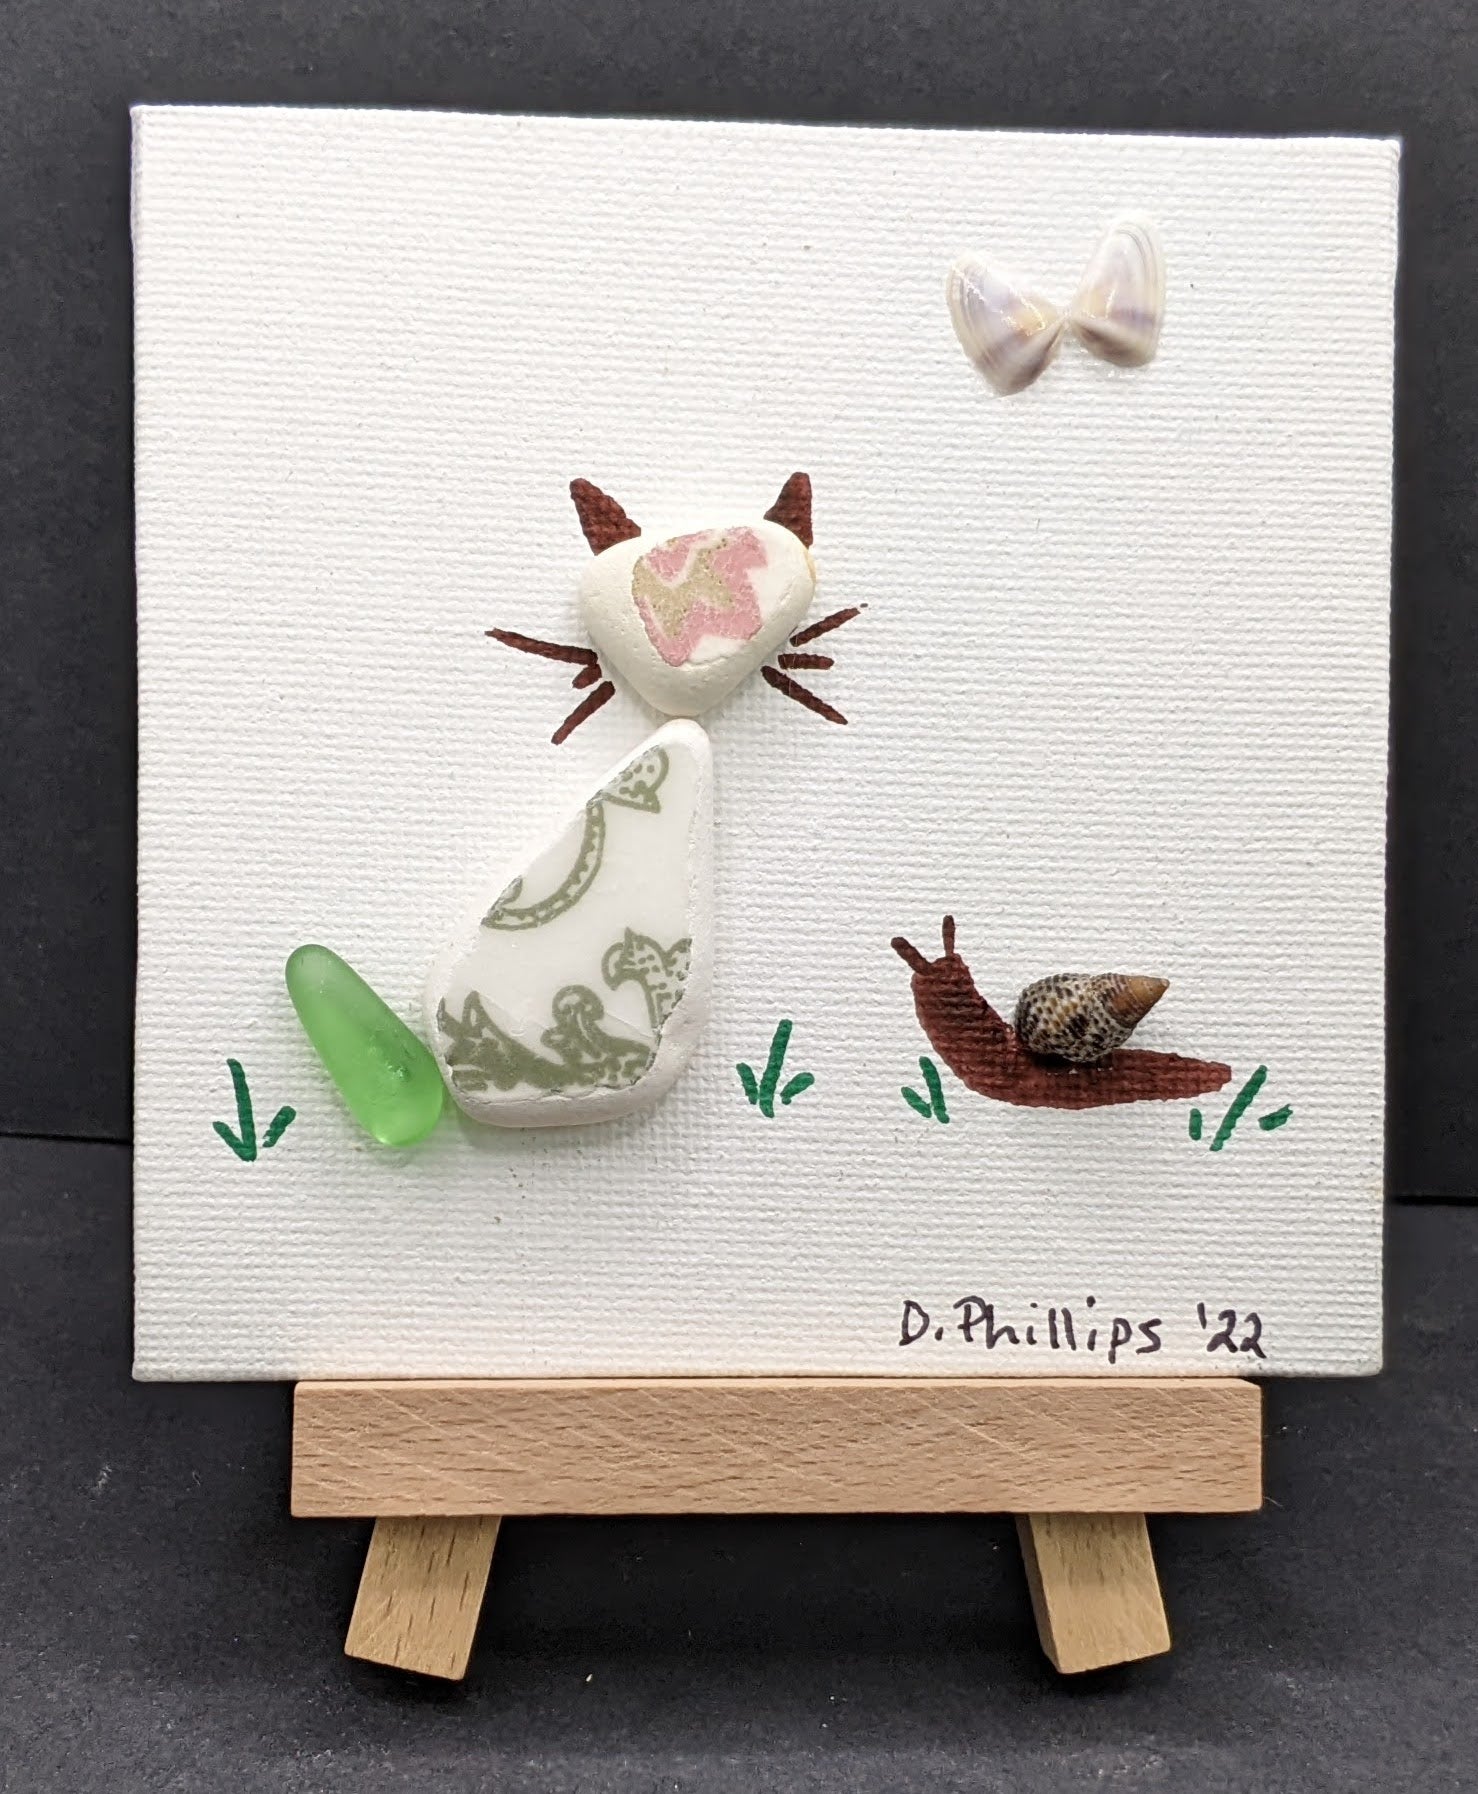 Cat, butterfly, and snail